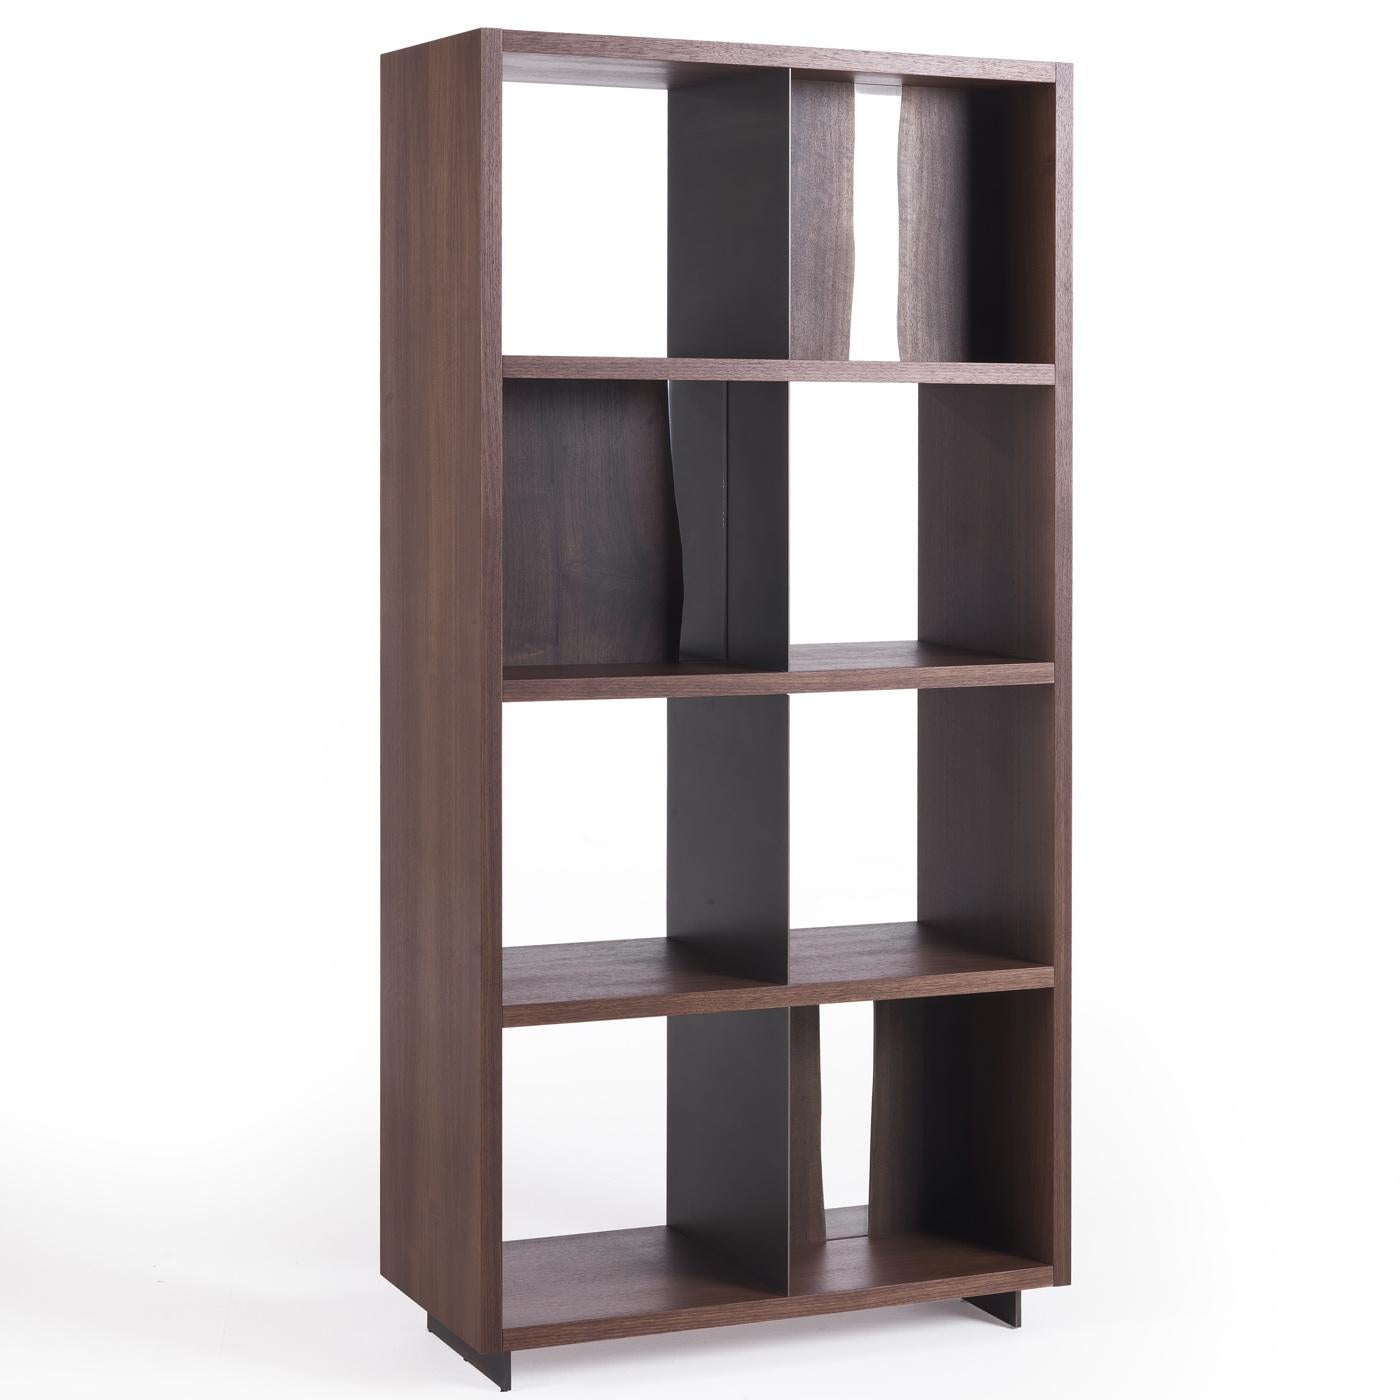 A magnificent modern piece of skillful, traditional craftsmanship, this striking bookcase is entirely crafted of Canaletto walnut wood, showcasing its natural dark hue. The piece is composed of four shelves, each with two compartments which are